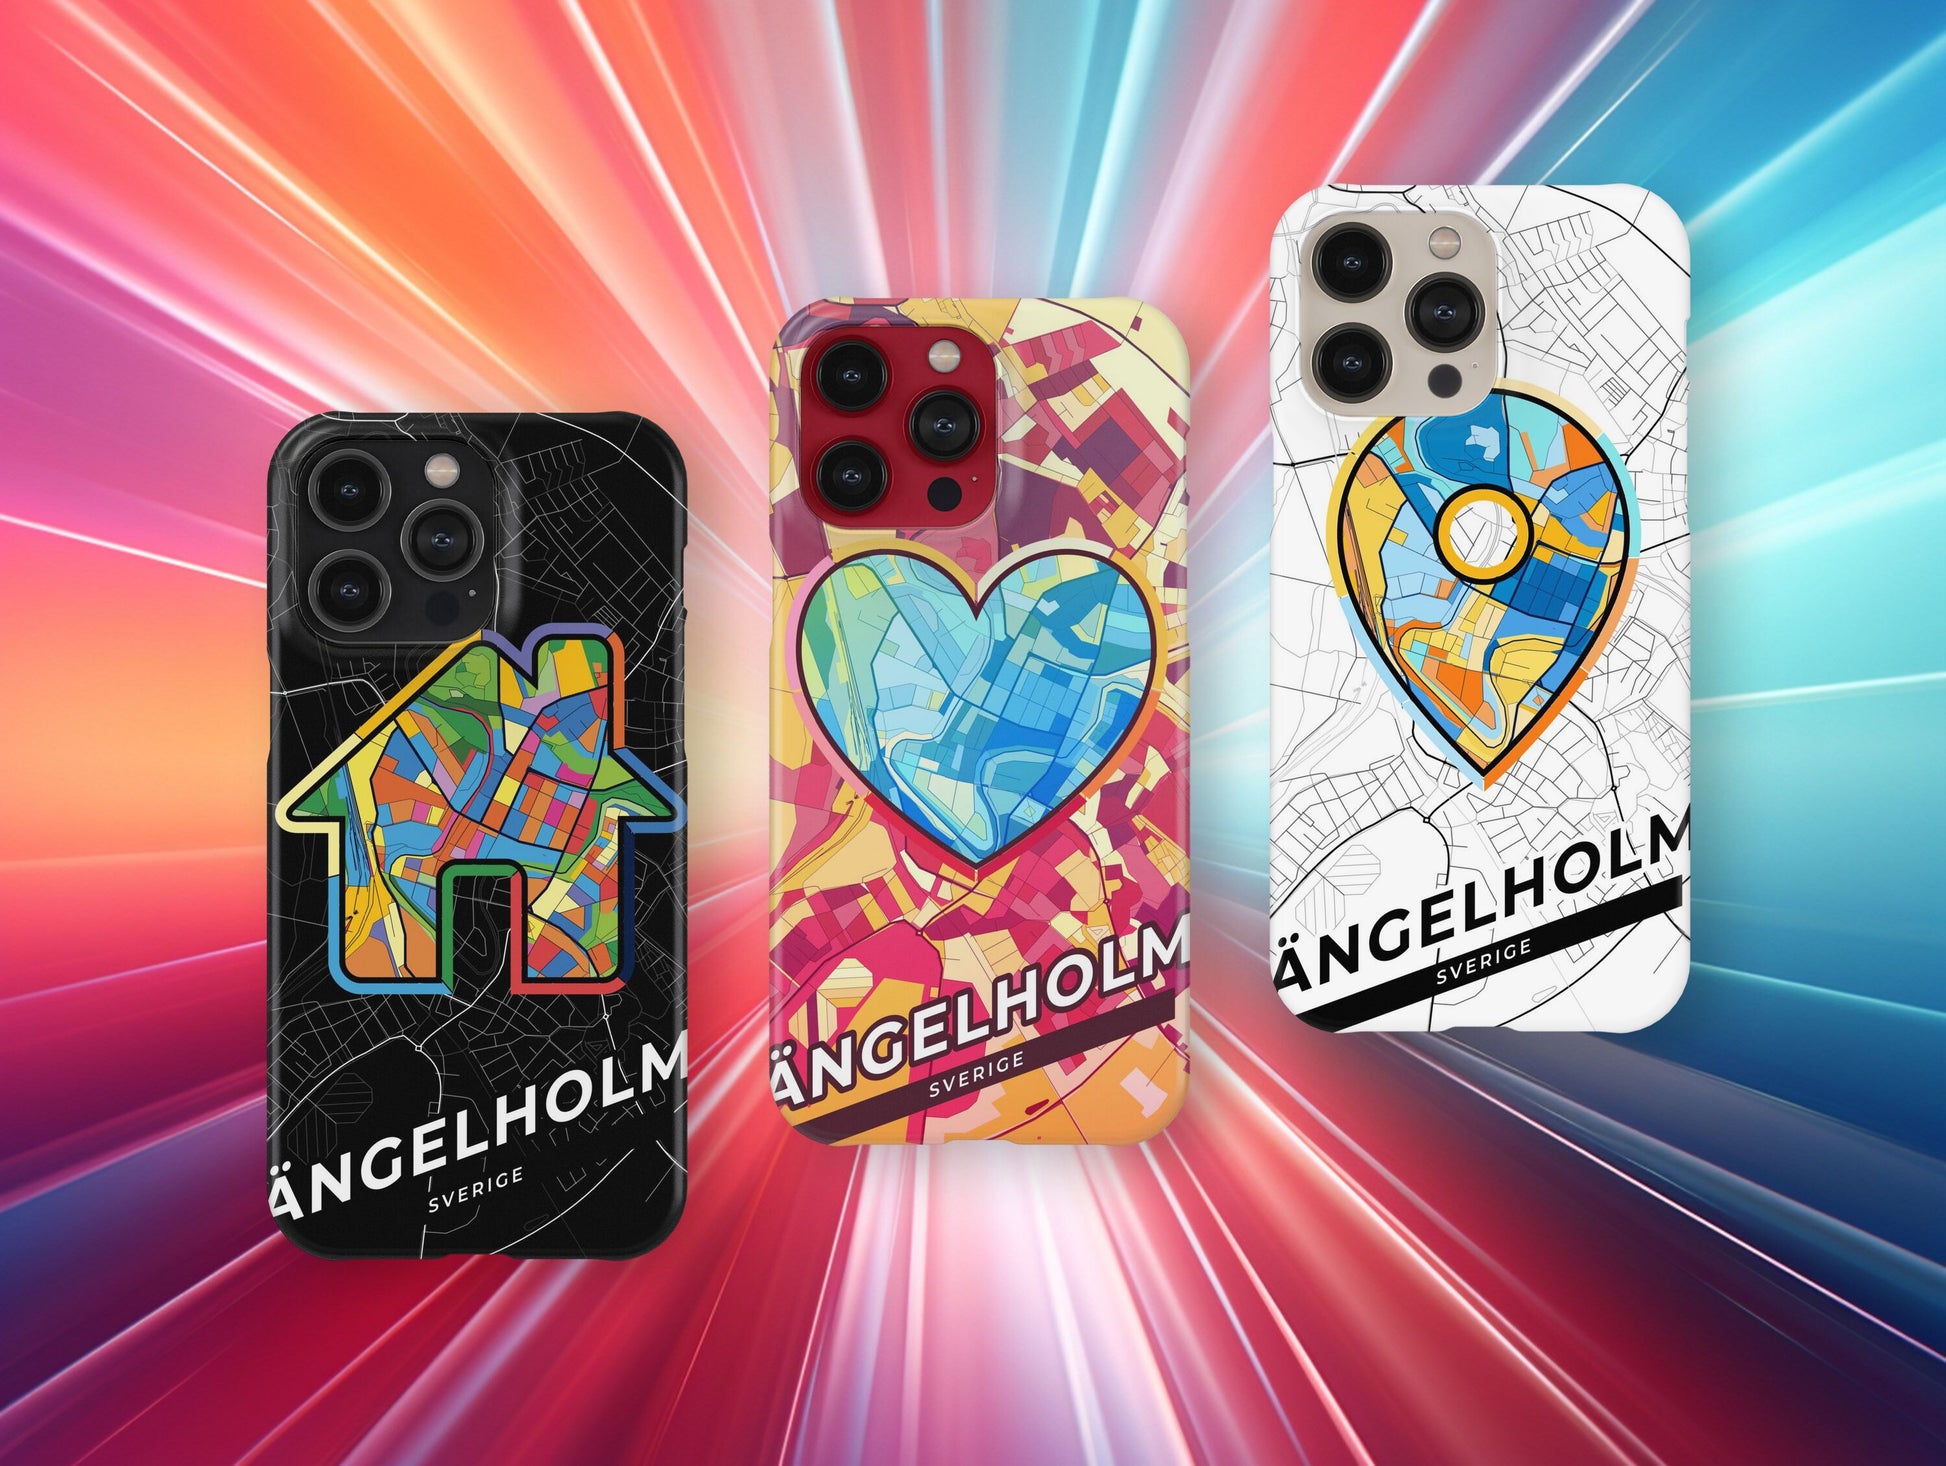 Ängelholm Sweden slim phone case with colorful icon. Birthday, wedding or housewarming gift. Couple match cases.